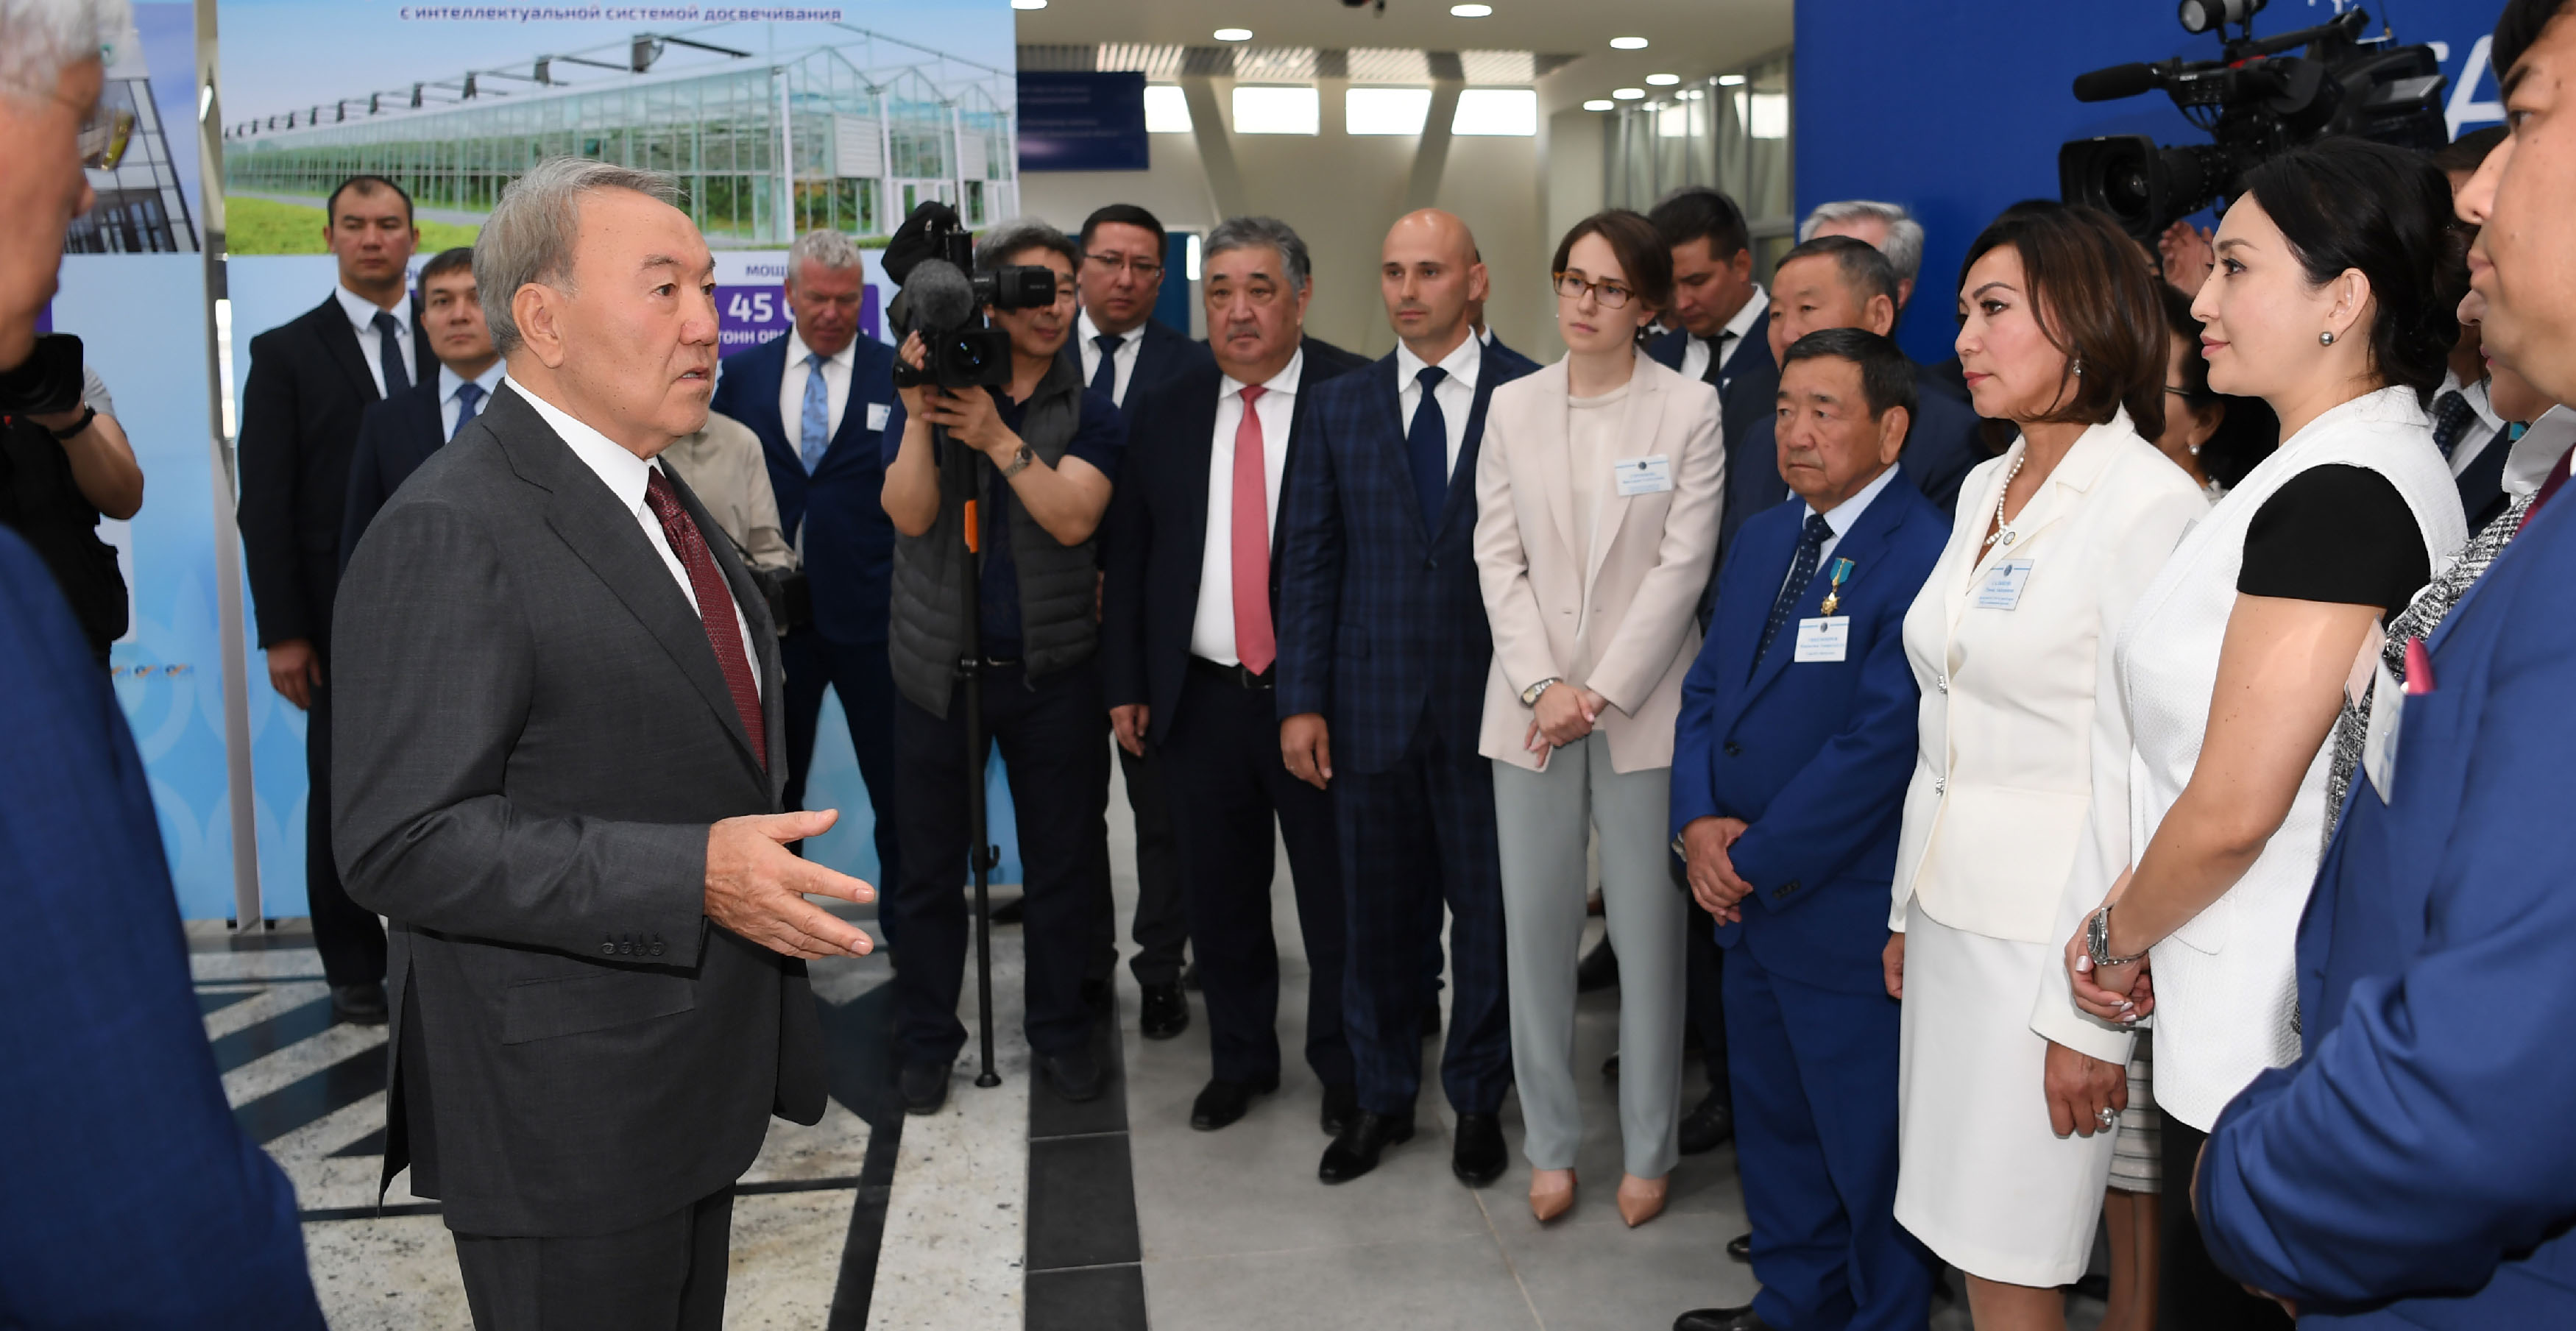 The Head of State visits Atameken Business City exhibition complex